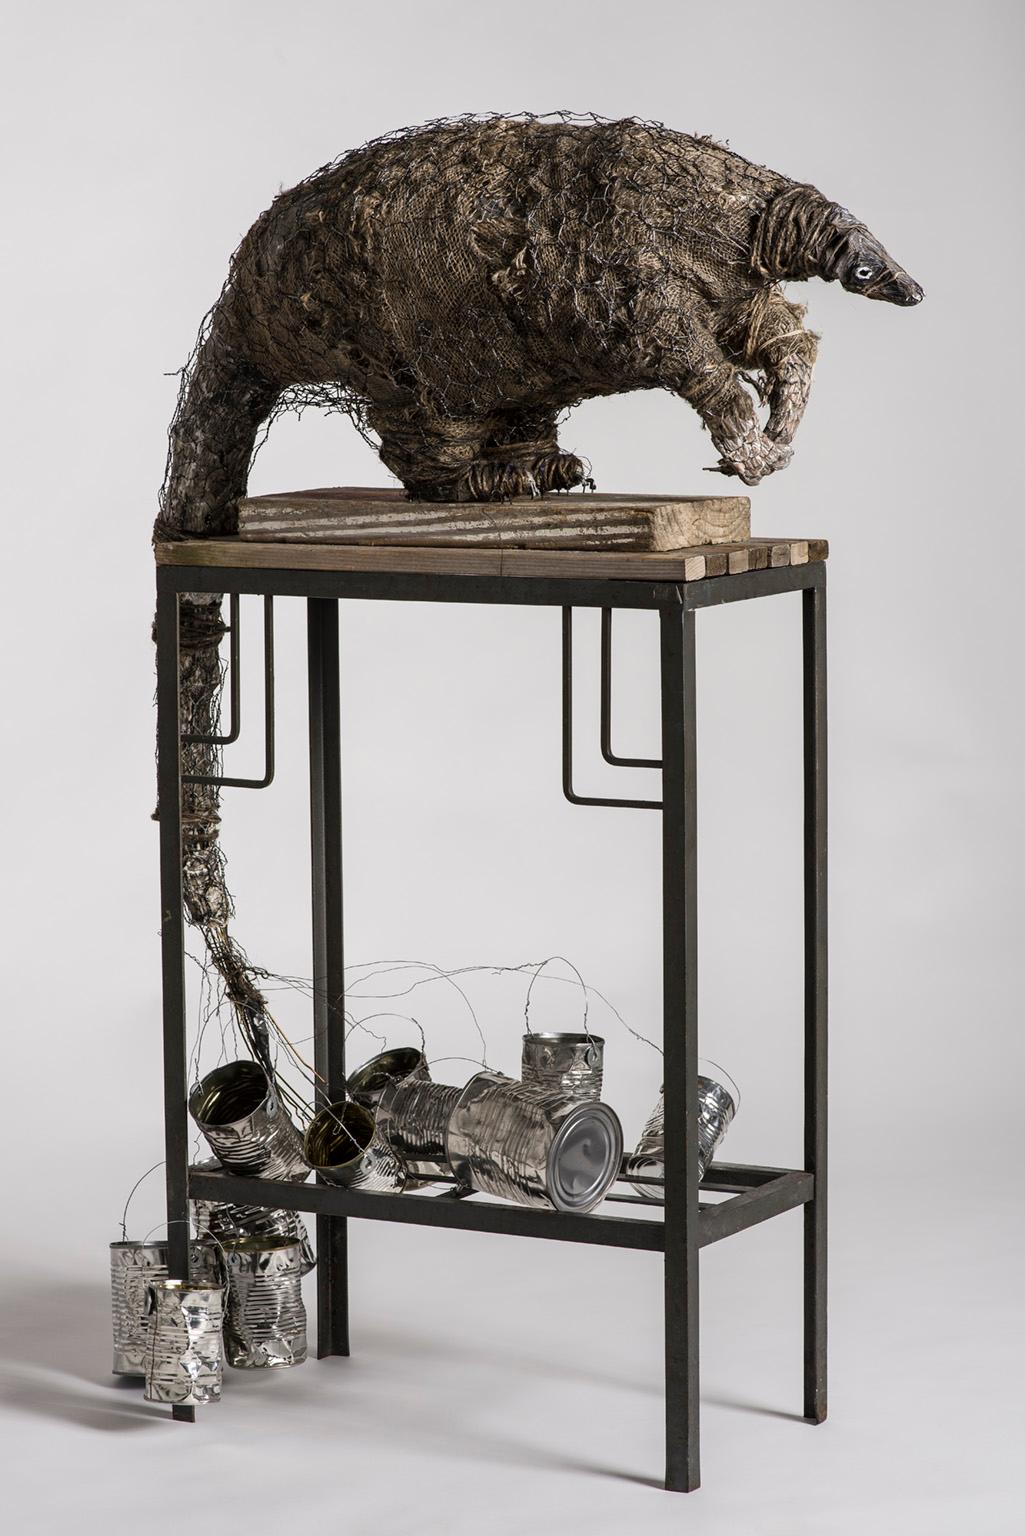 Anteater sculpture on high platform with tin cans: 'A Grim Fairy Tale'